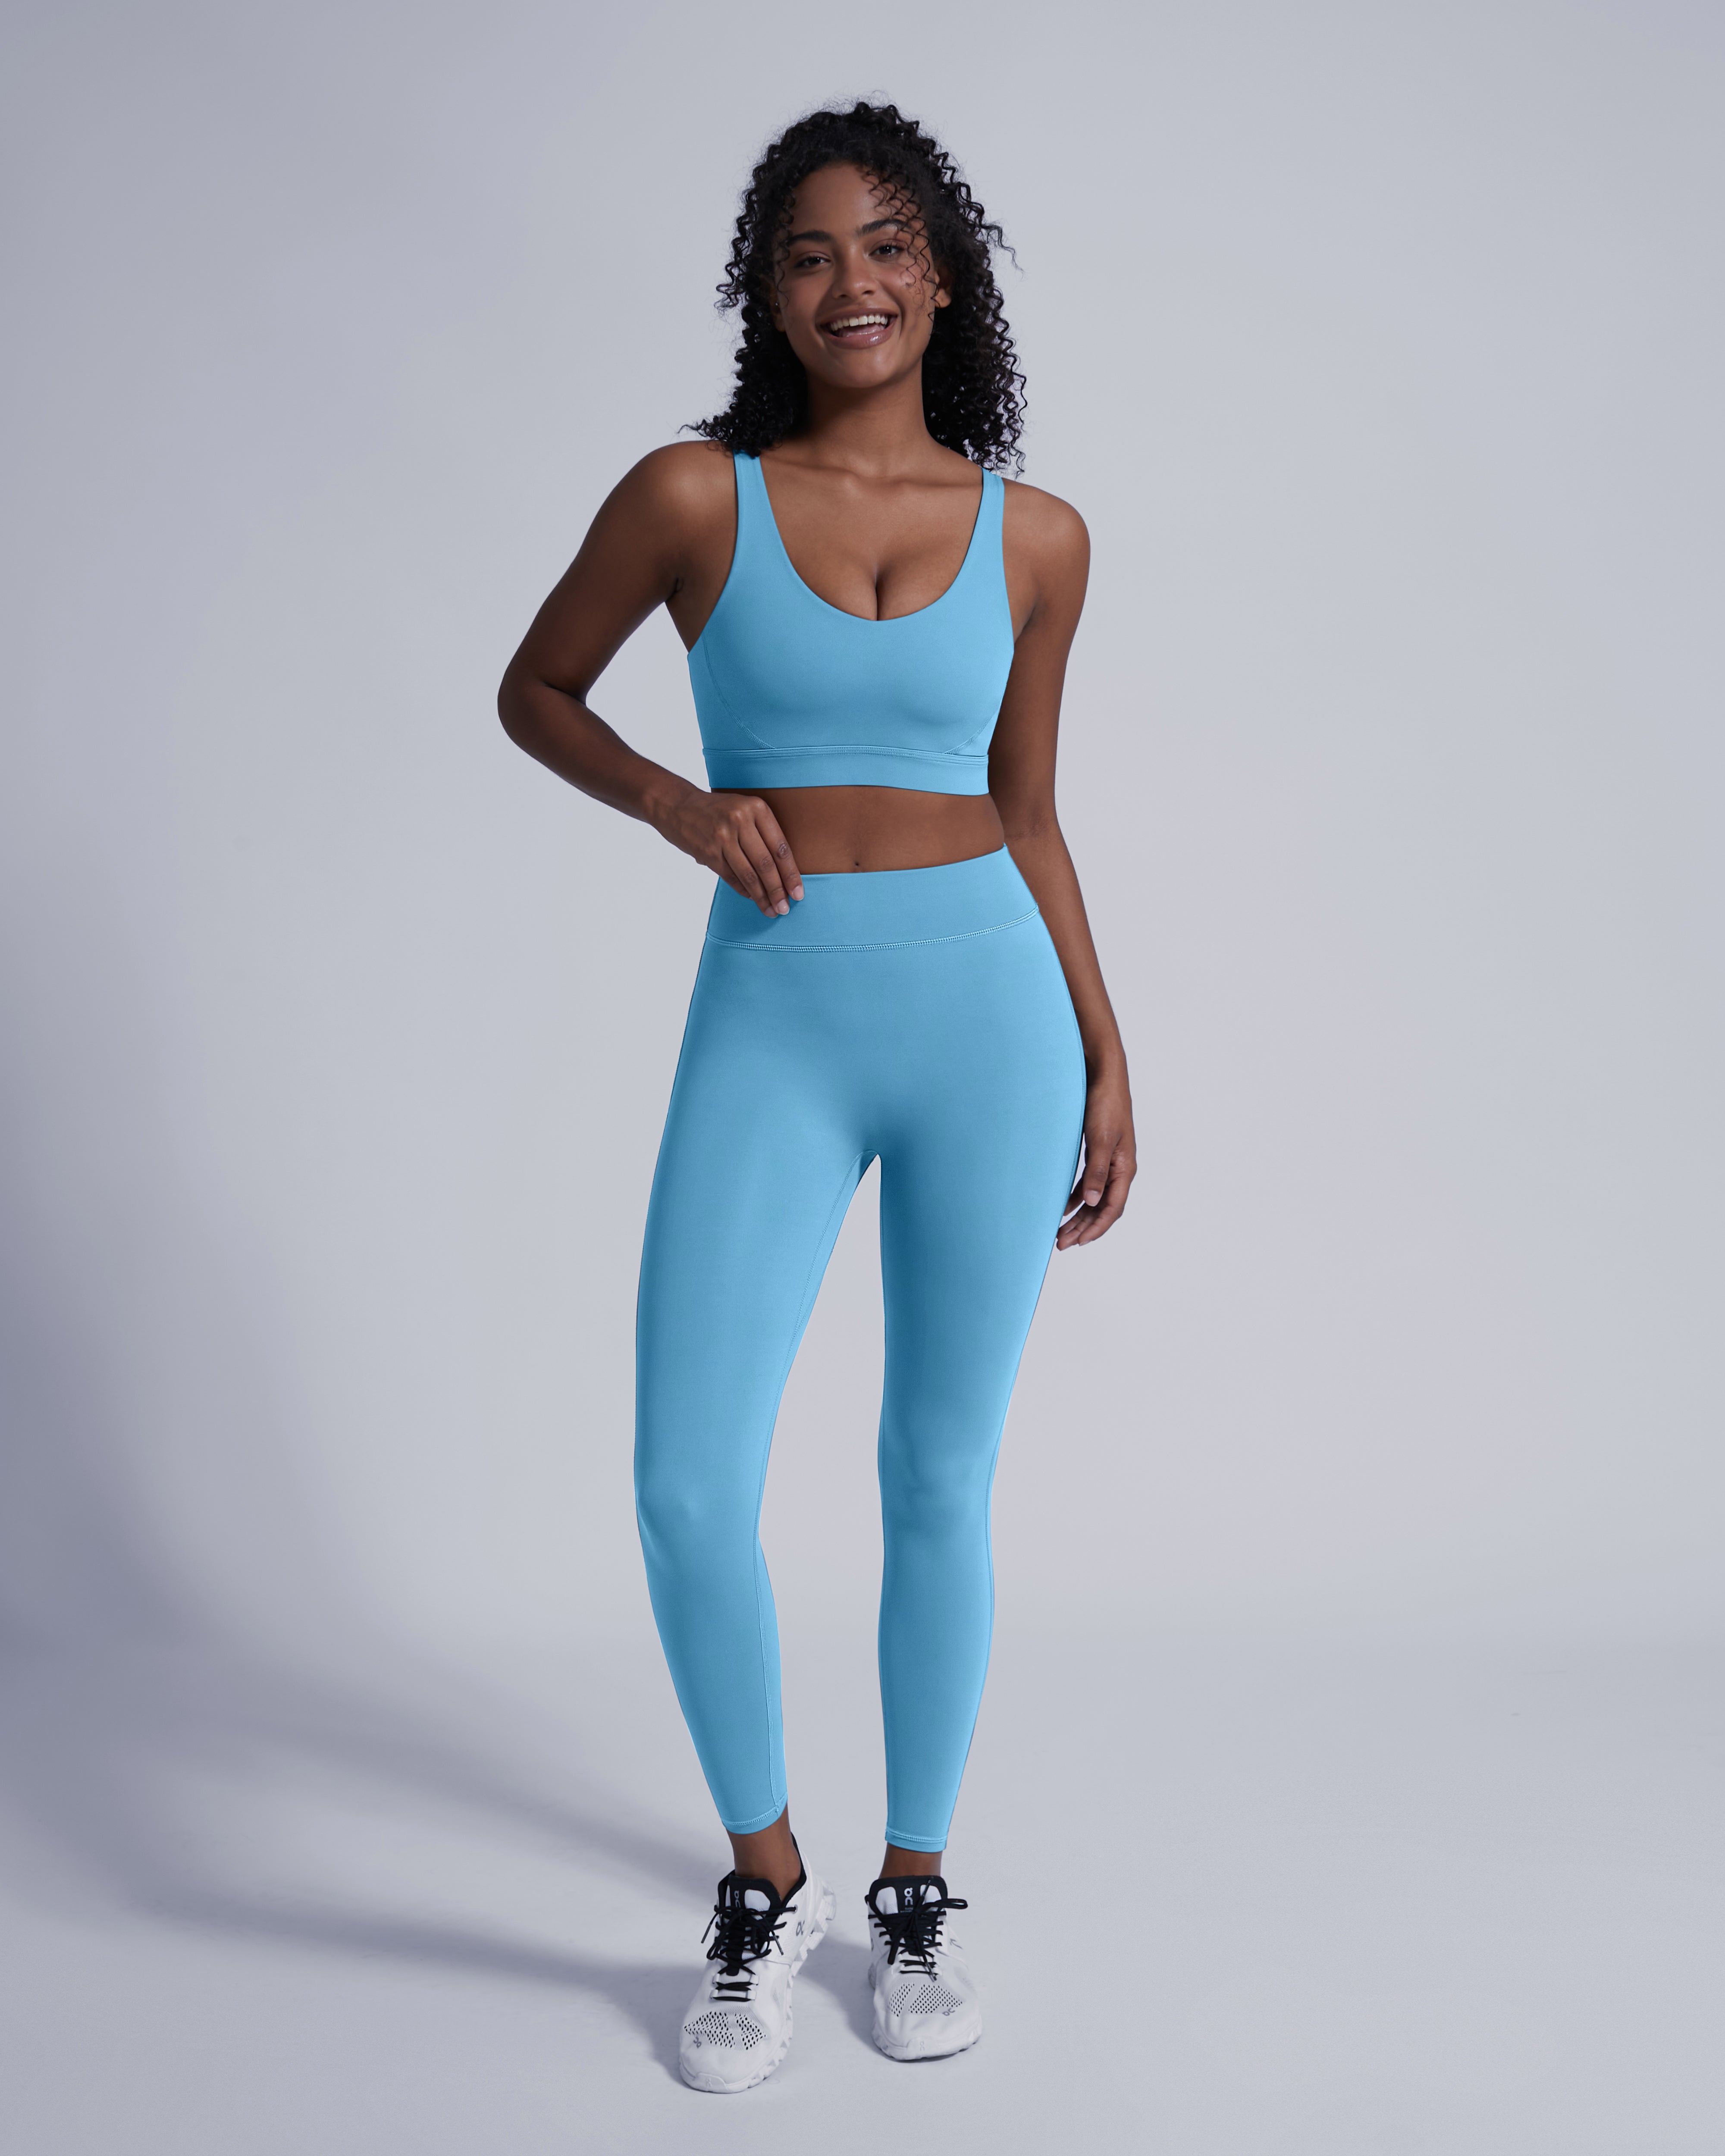 Amazon shoppers rave over tummy control leggings that lift your bum - RSVP  Live